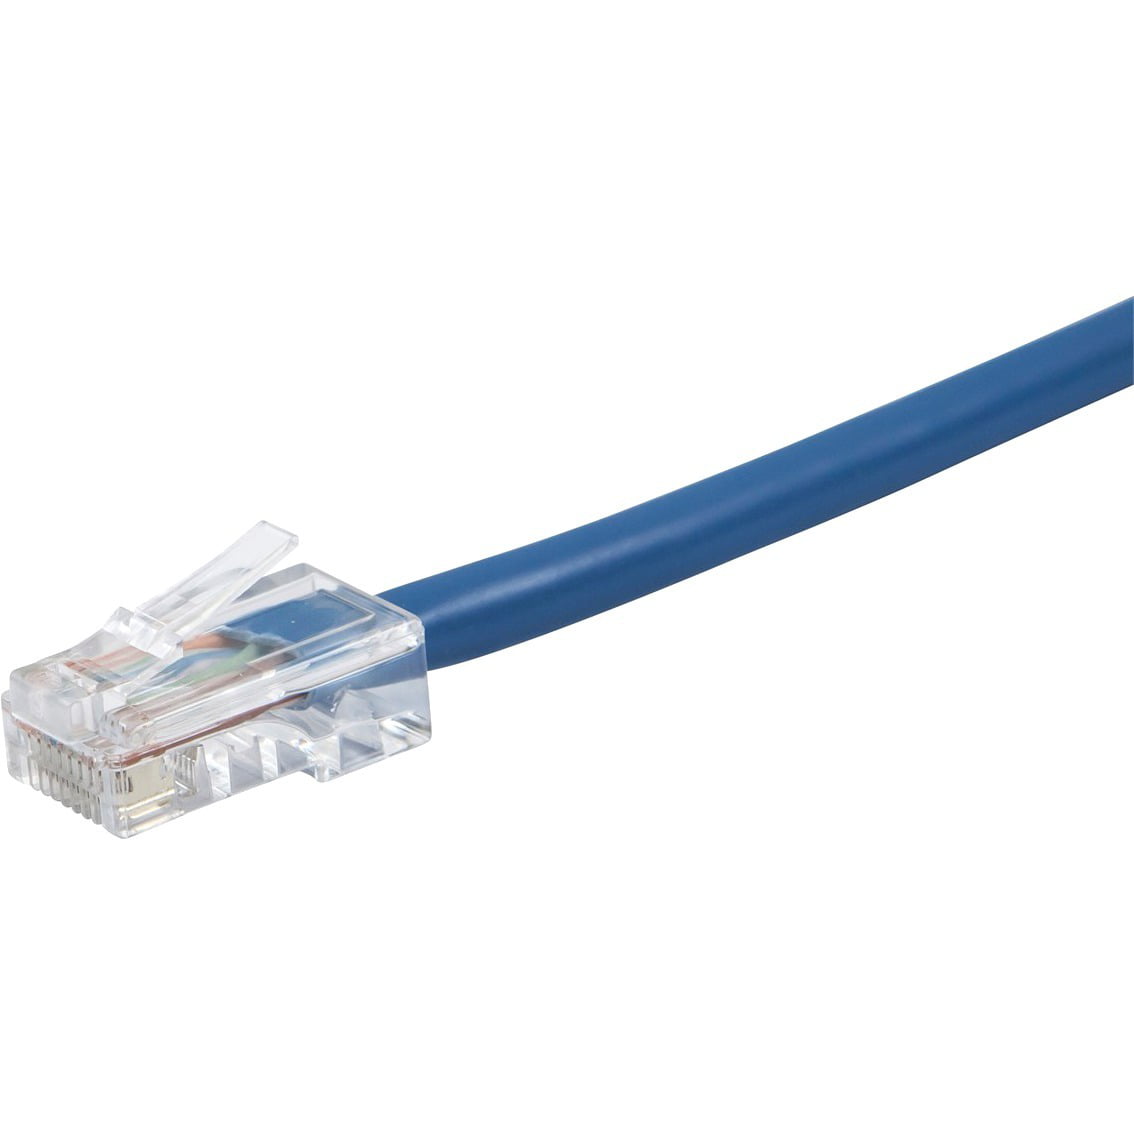 20 Pack LOT 75ft Cat6 Ethernet Network Patch Cable Blue 75 Feet Wire 